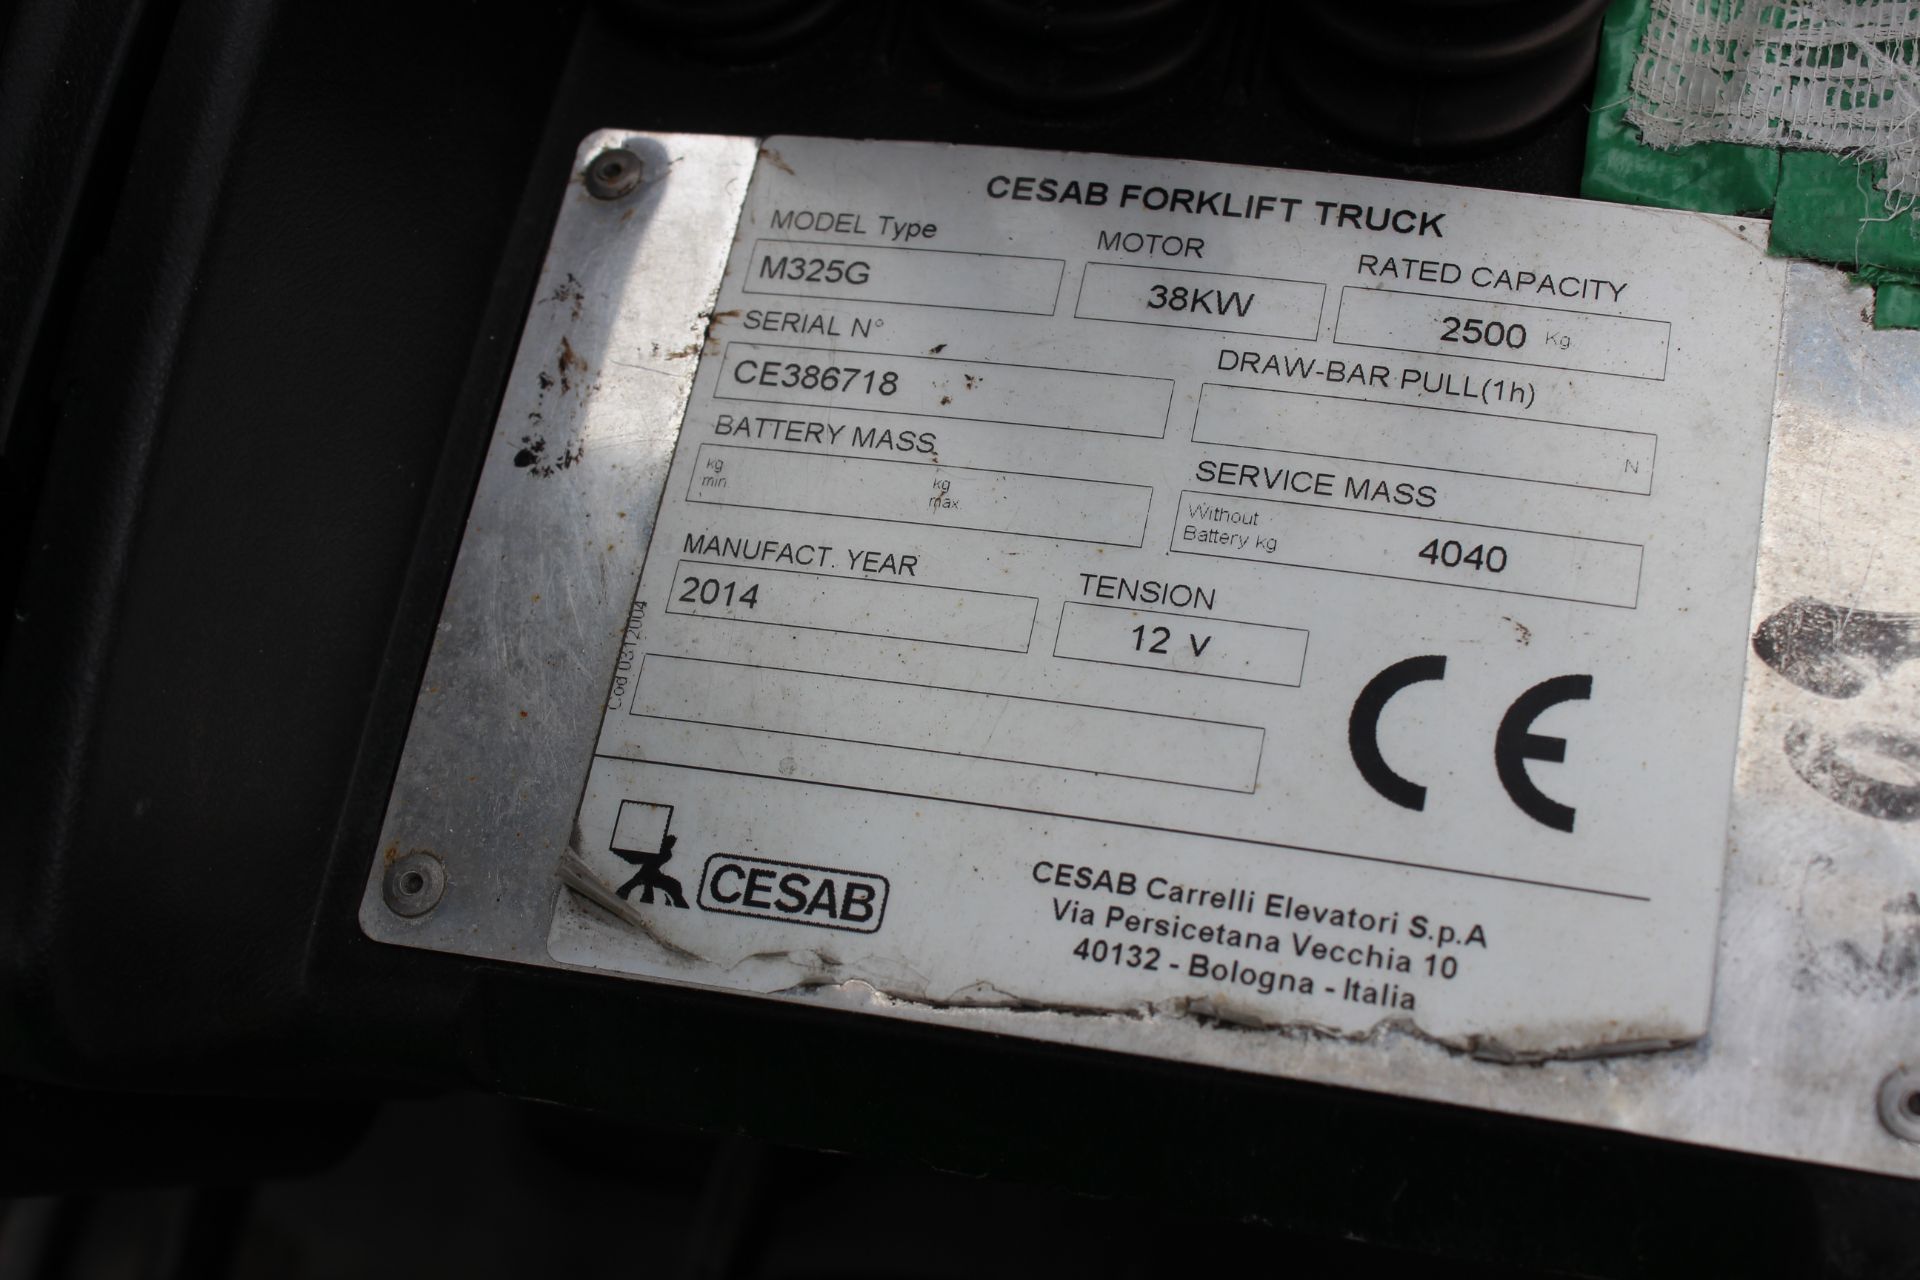 Cesab LPG forklift truck, W32SG, Capacity 2.5KG, Serial Number CE386718, Year 2014, Hours 3703 * - Image 6 of 7